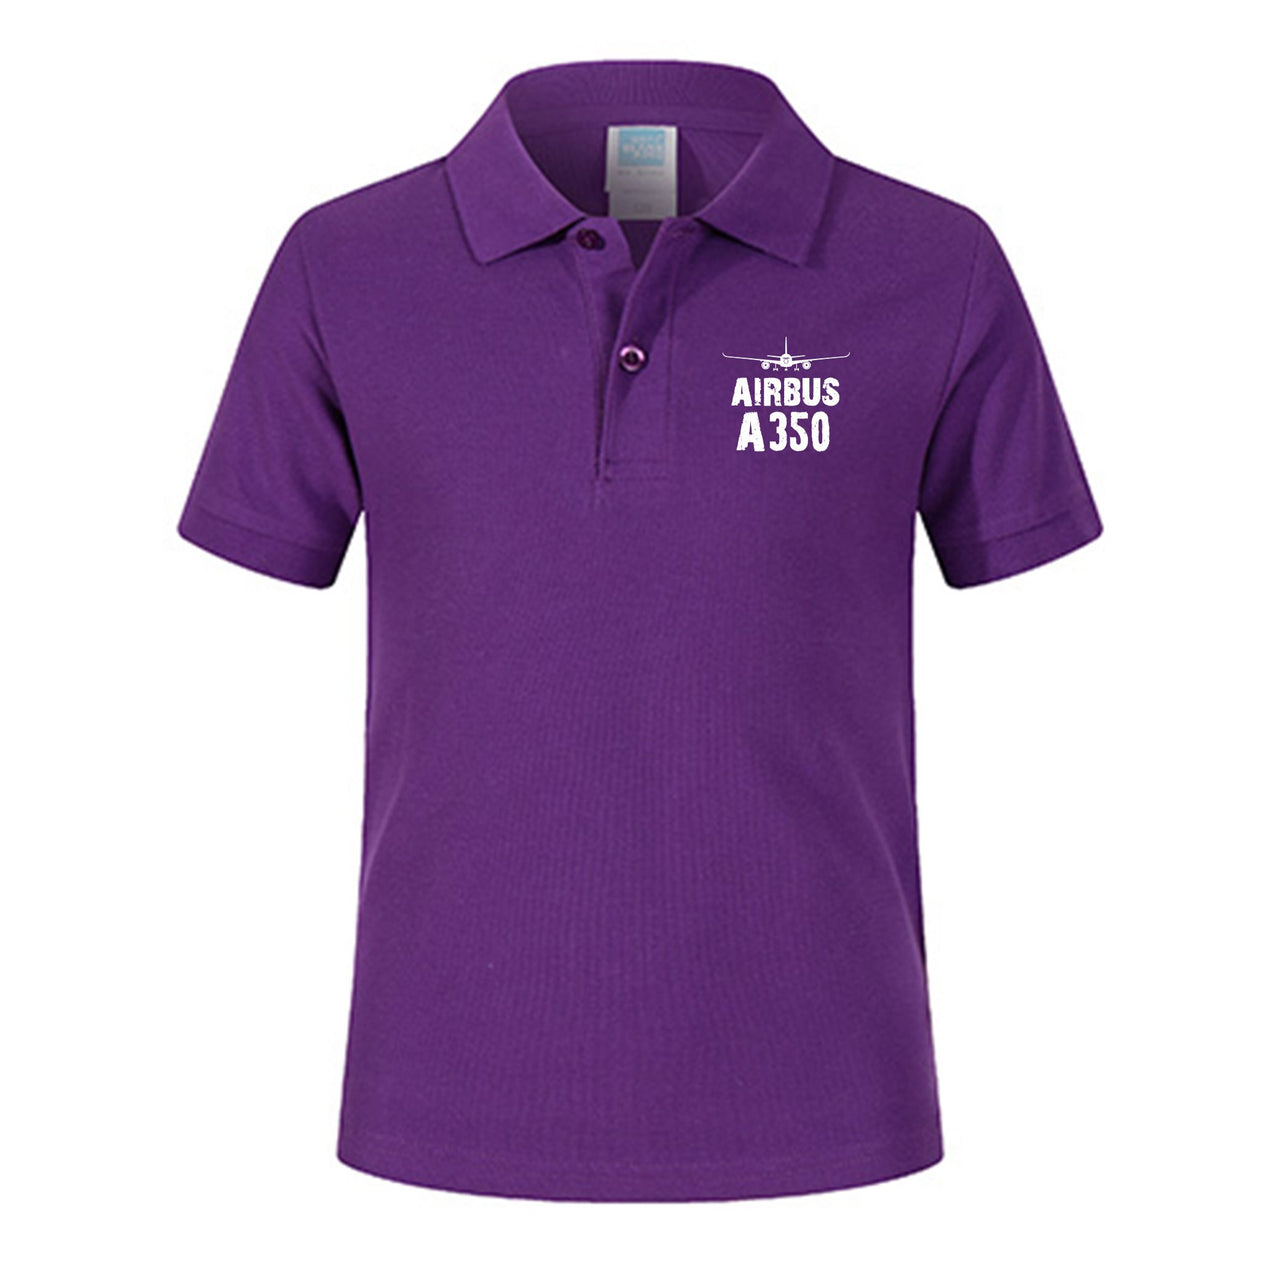 Airbus A350 & Plane Designed Children Polo T-Shirts